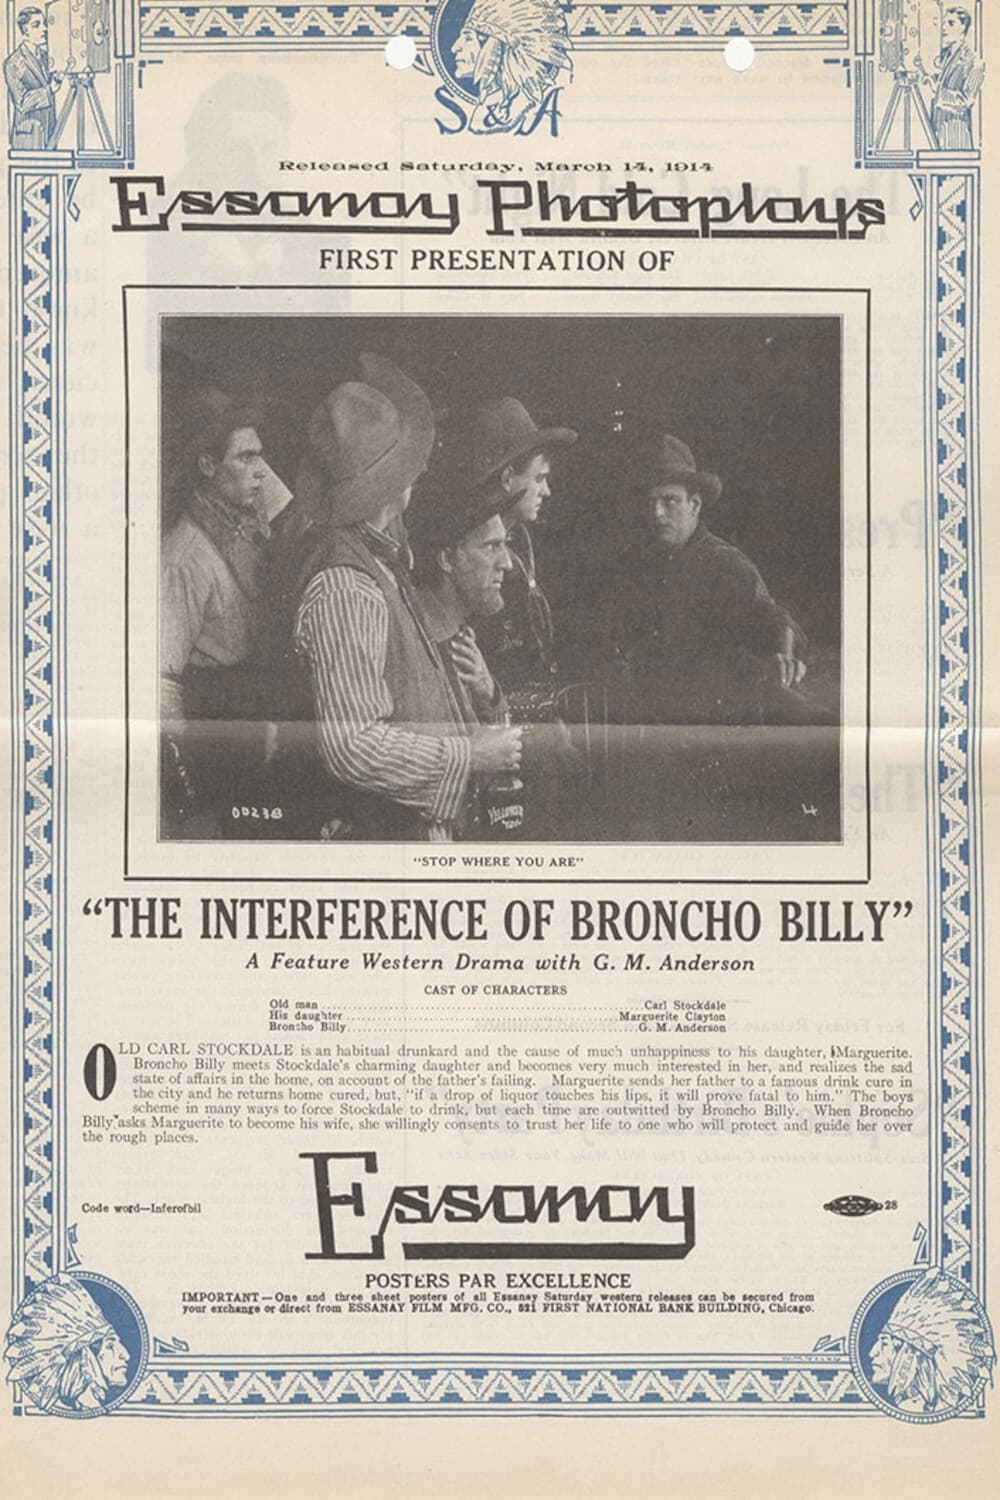 The Inference of Broncho Billy